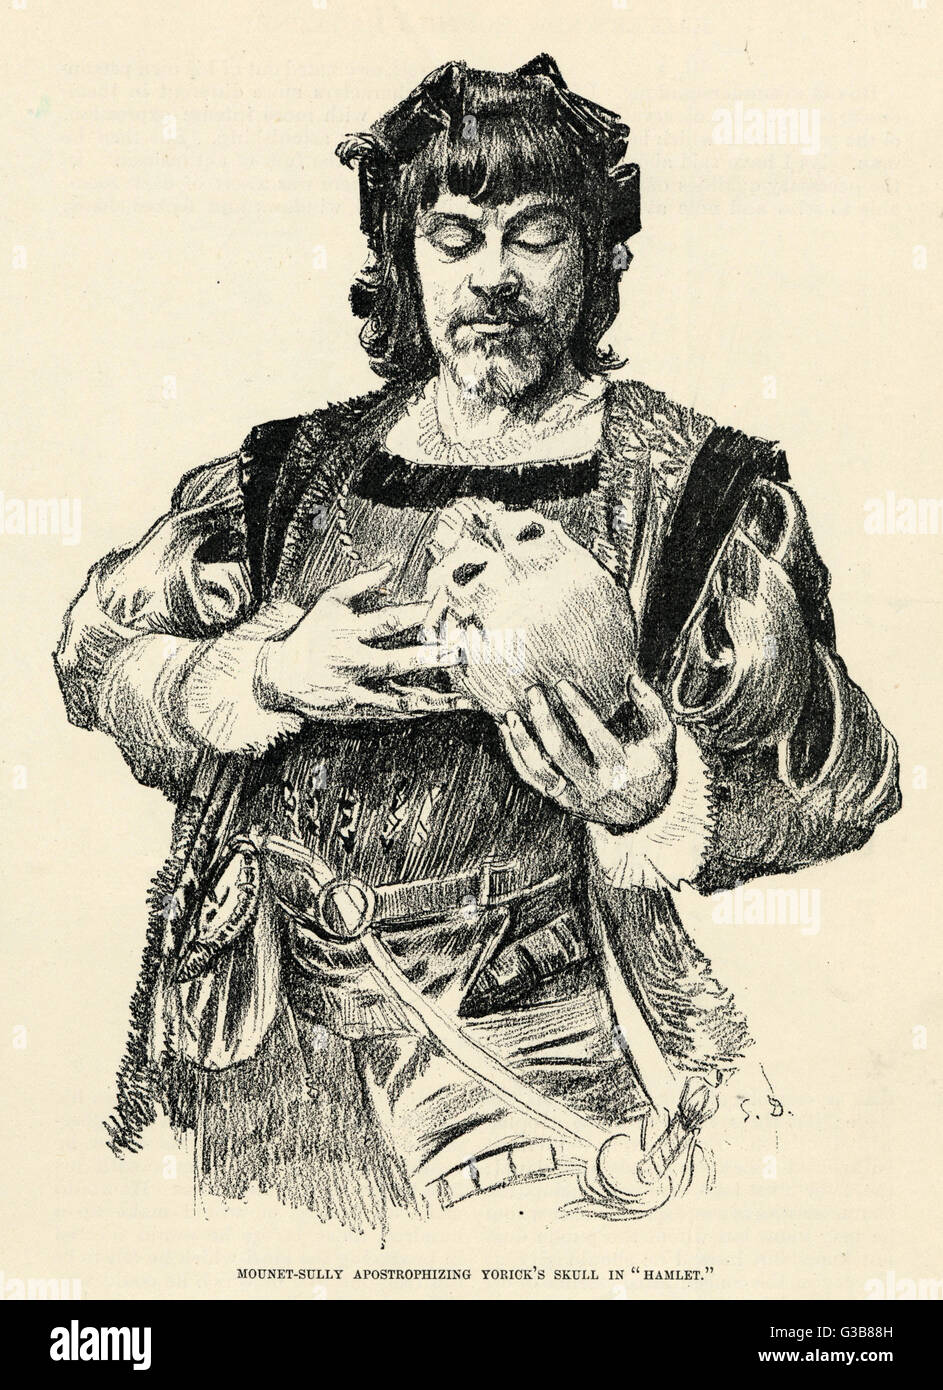 The French actor, Mounet- Sully, in the role of Hamlet,  apostrophizing Yorick's skull       Date: 1887 Stock Photo